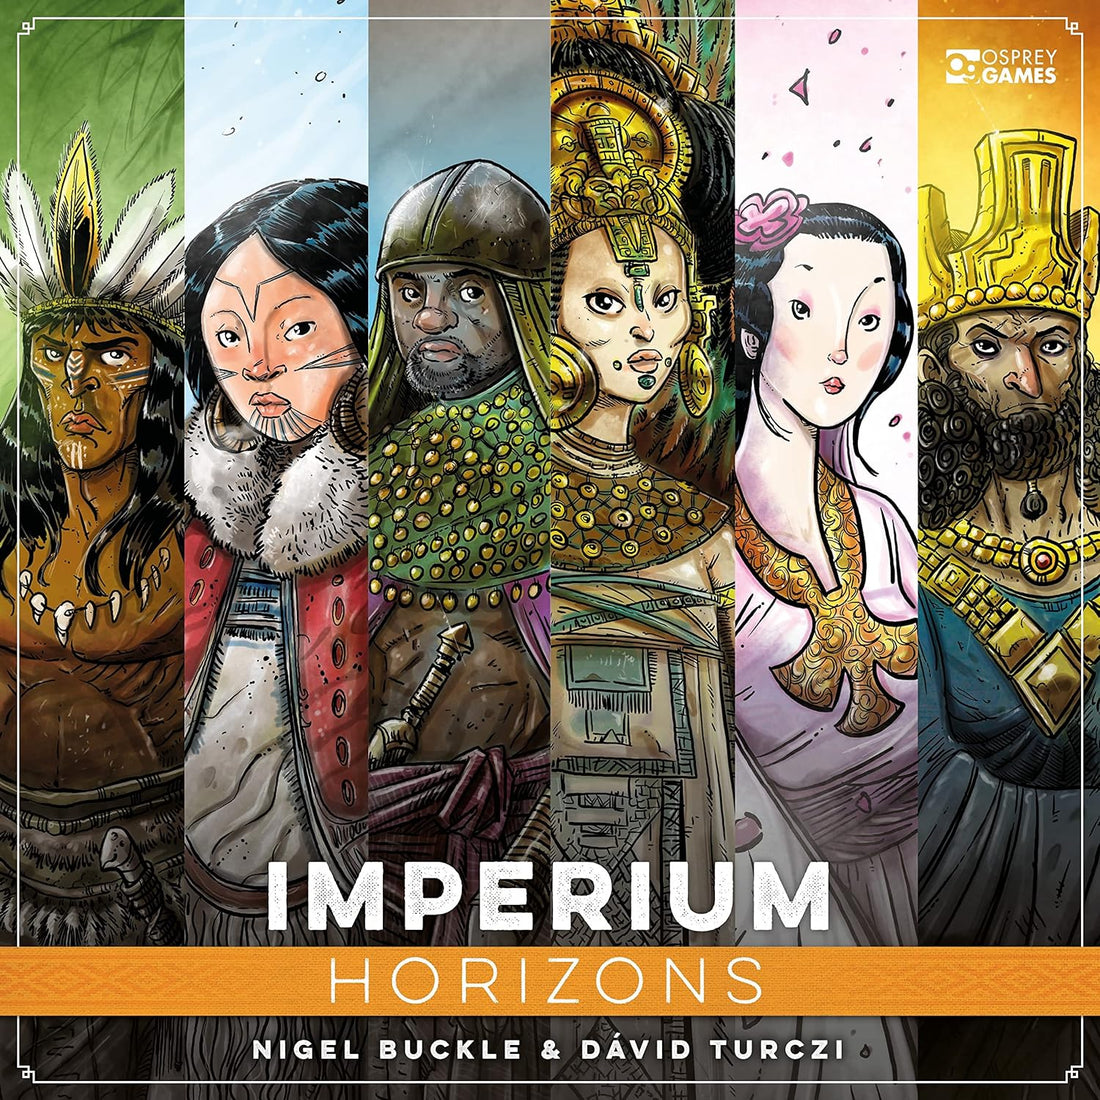 Playing Imperium:Horizons on March 2nd in Store!